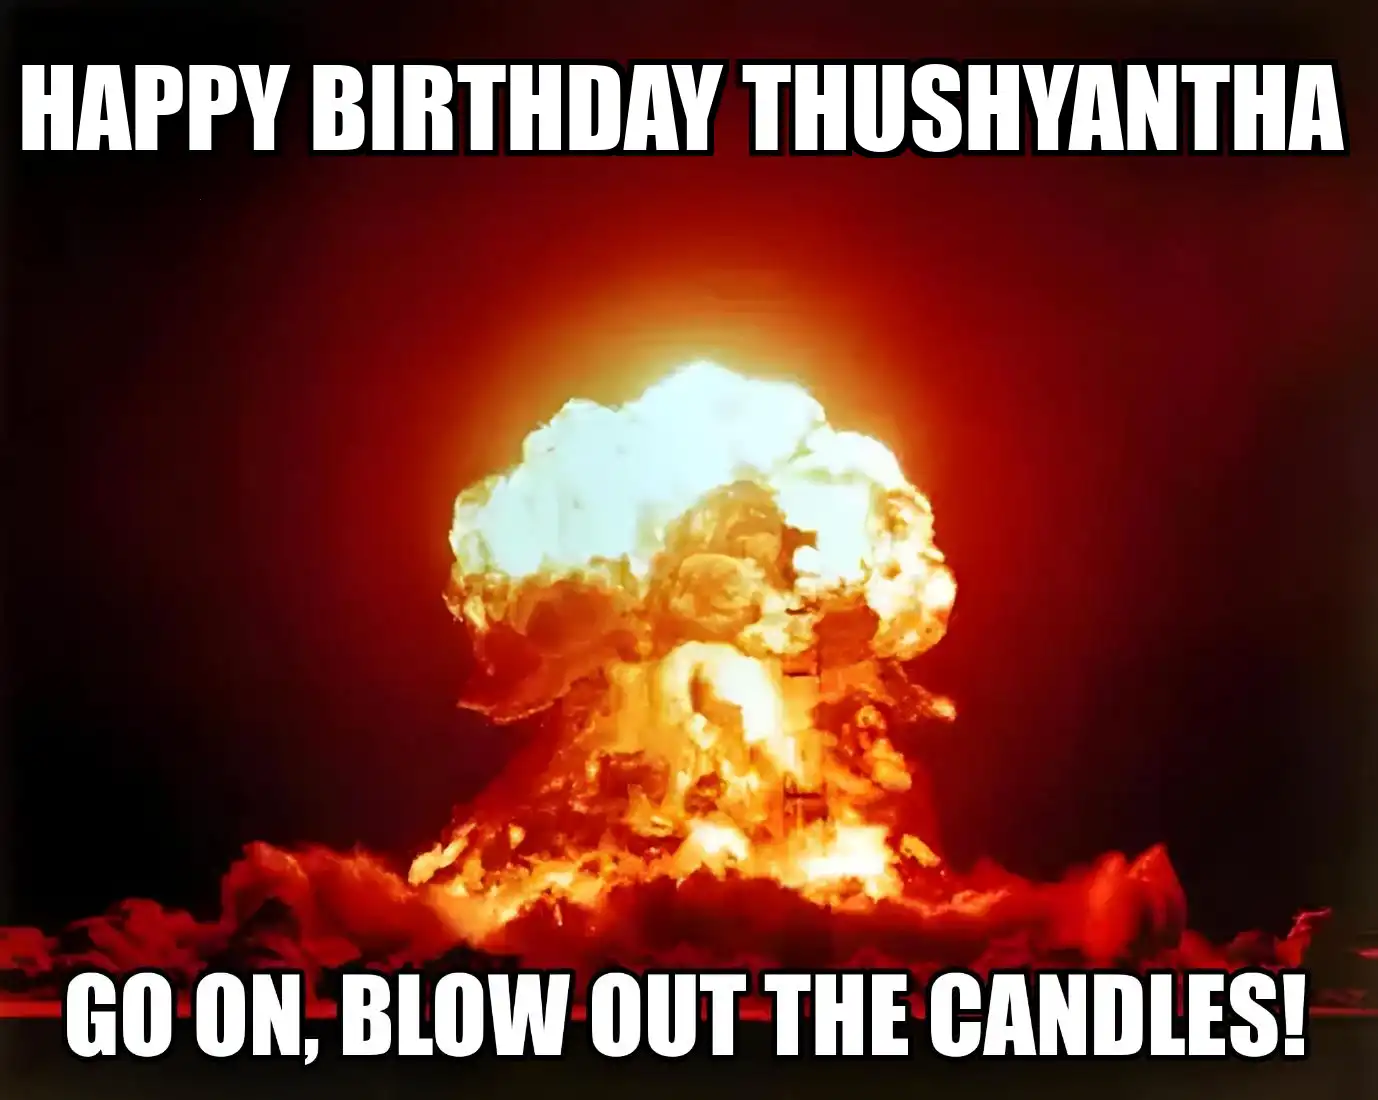 Happy Birthday Thushyantha Go On Blow Out The Candles Meme